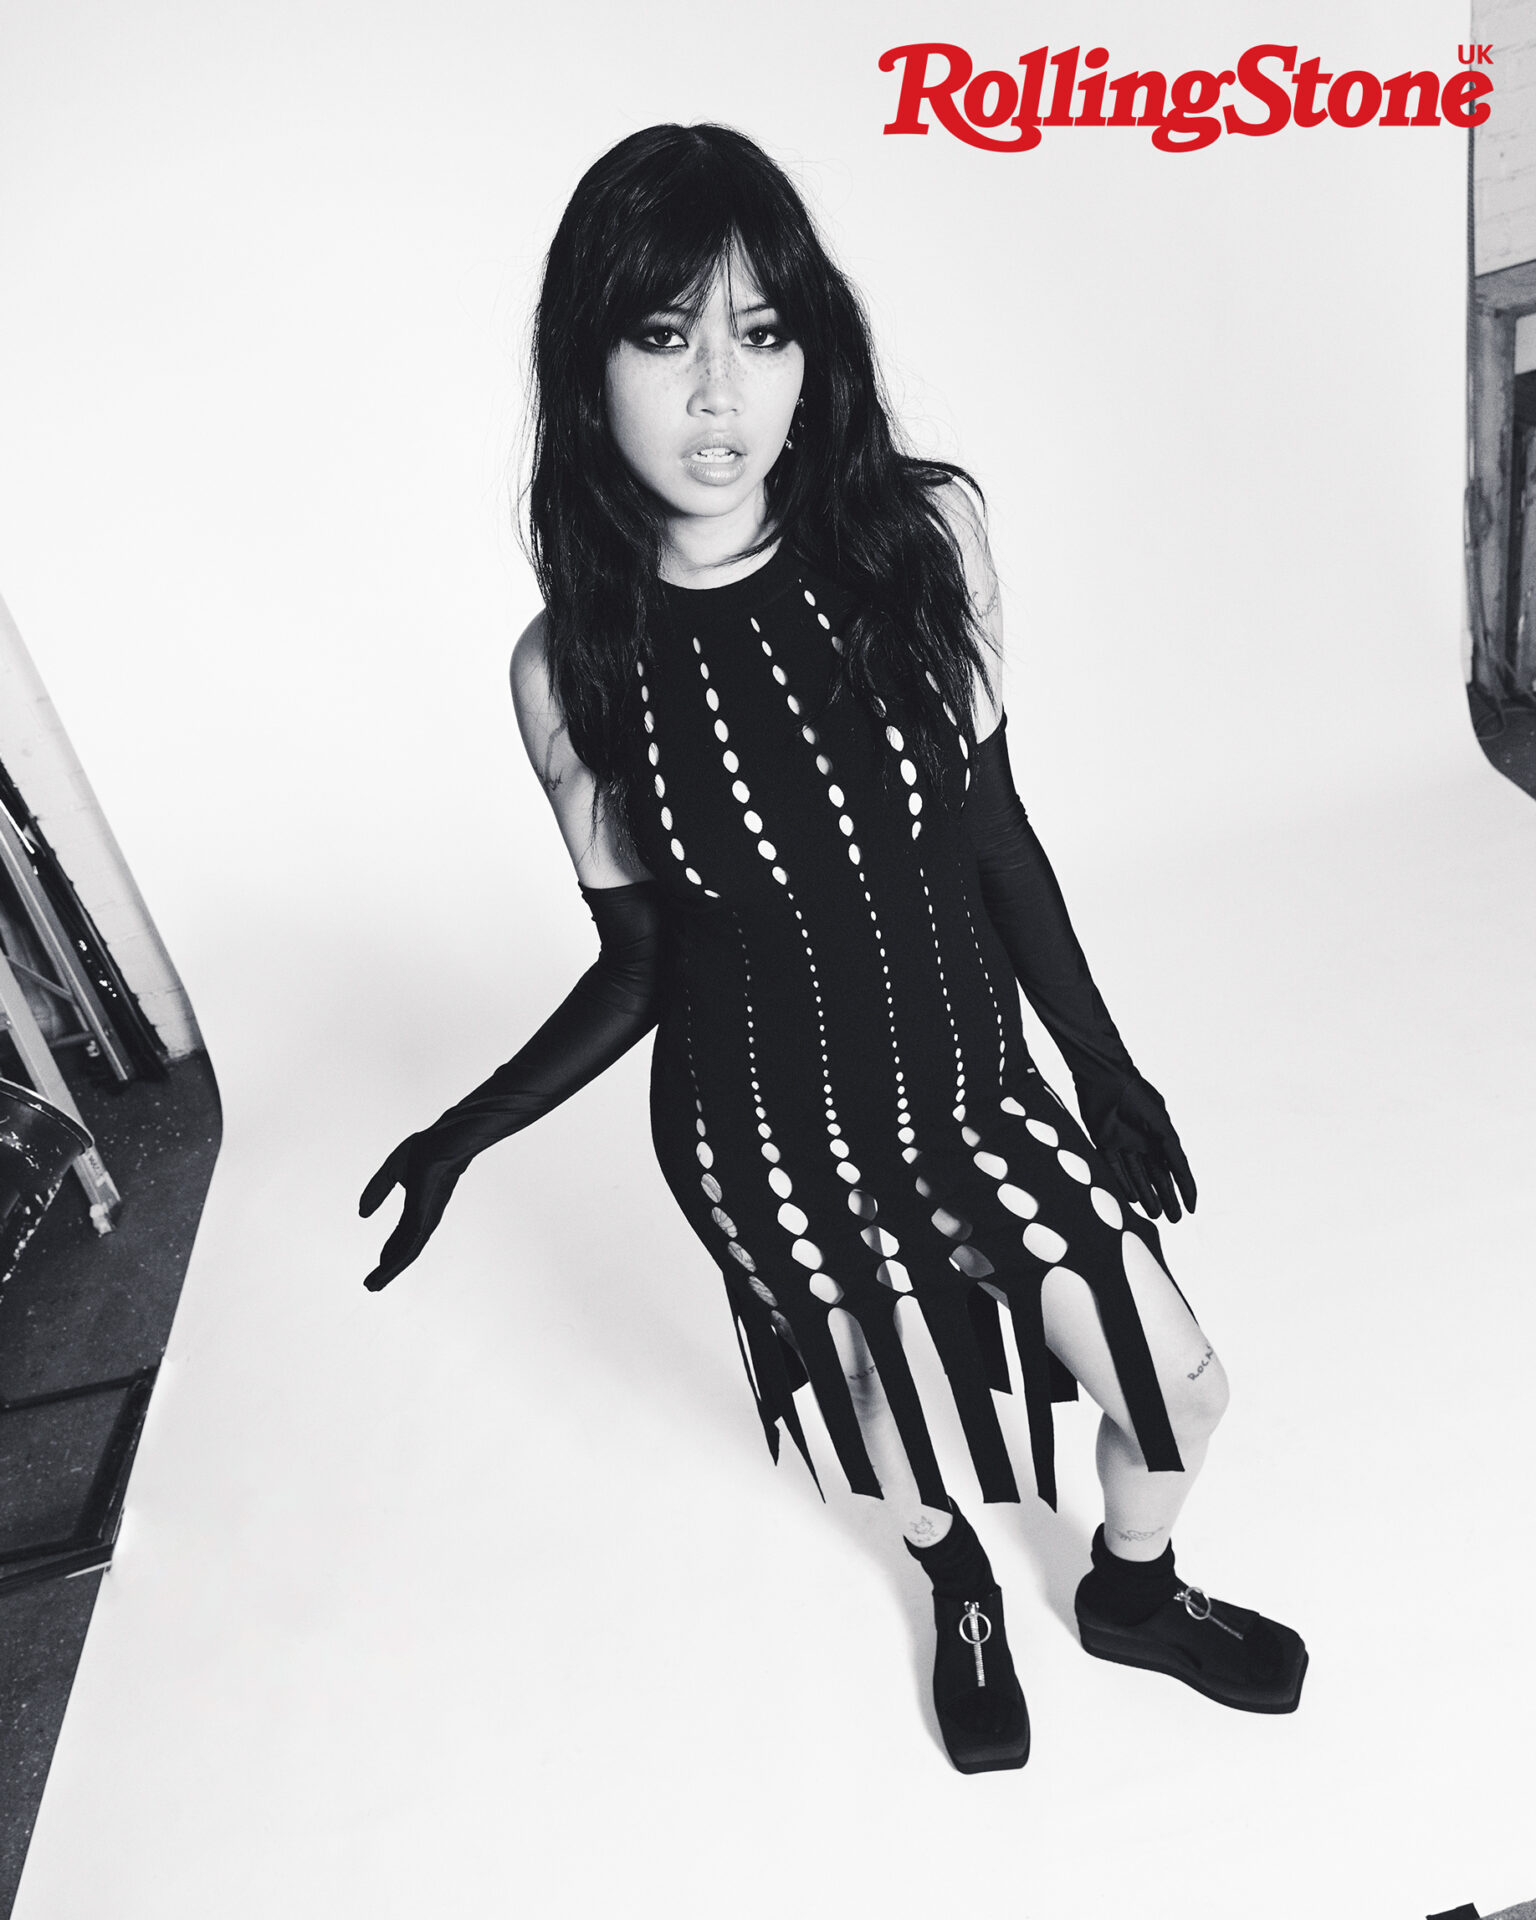 beabadoobee poses in a black corset dress in a black and white shot